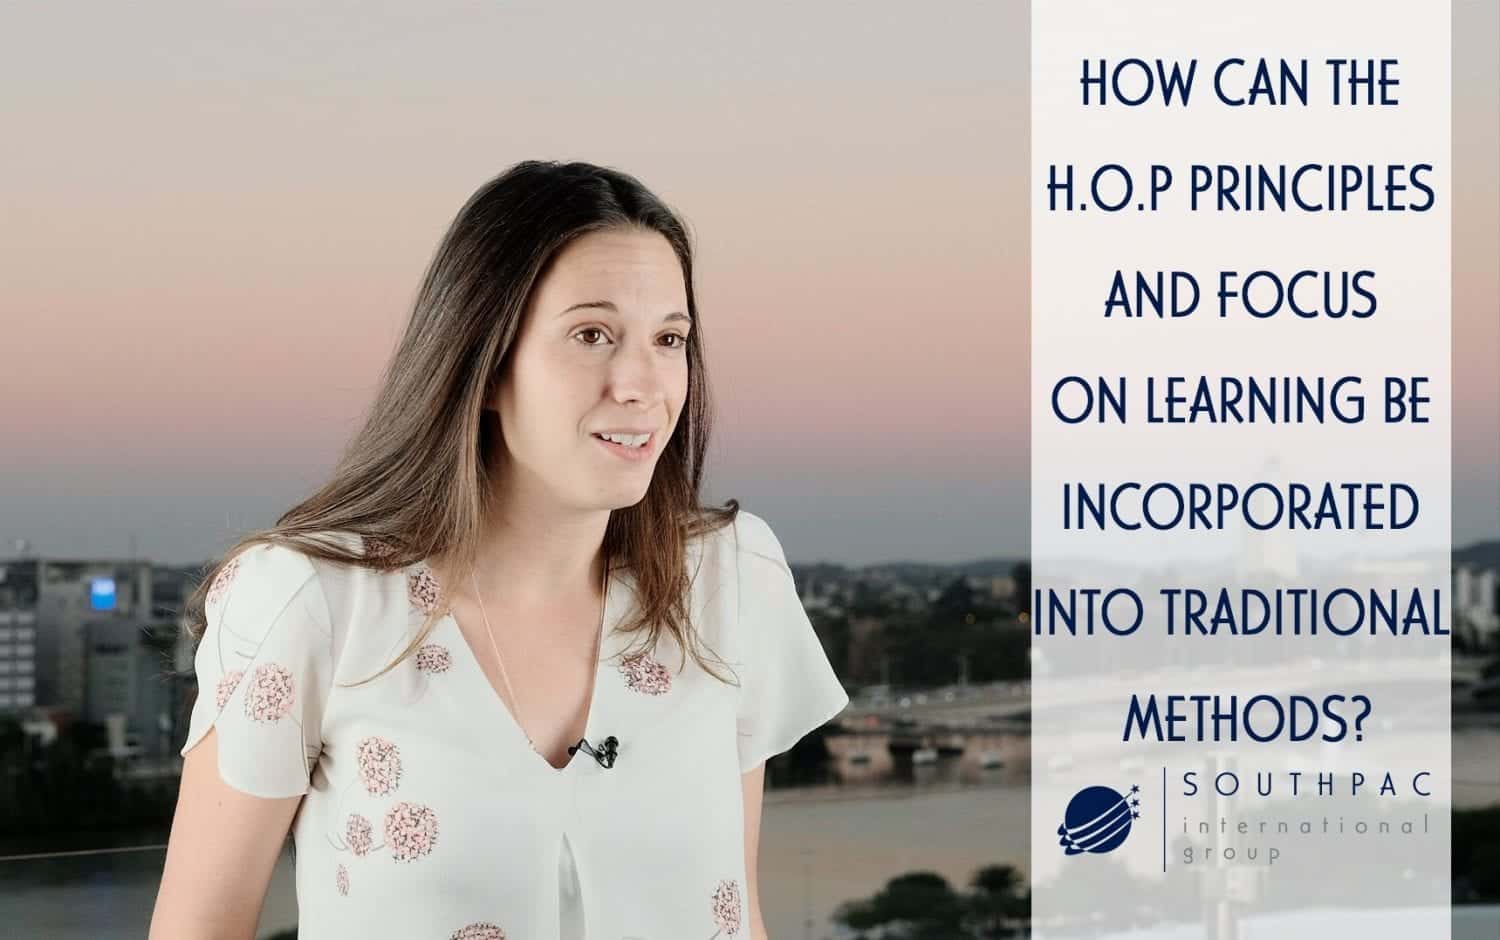 Andrea Baker, HOP Collaborator explains "How can the H.O.P principles and focus on learning be incorporated into traditional methods?'